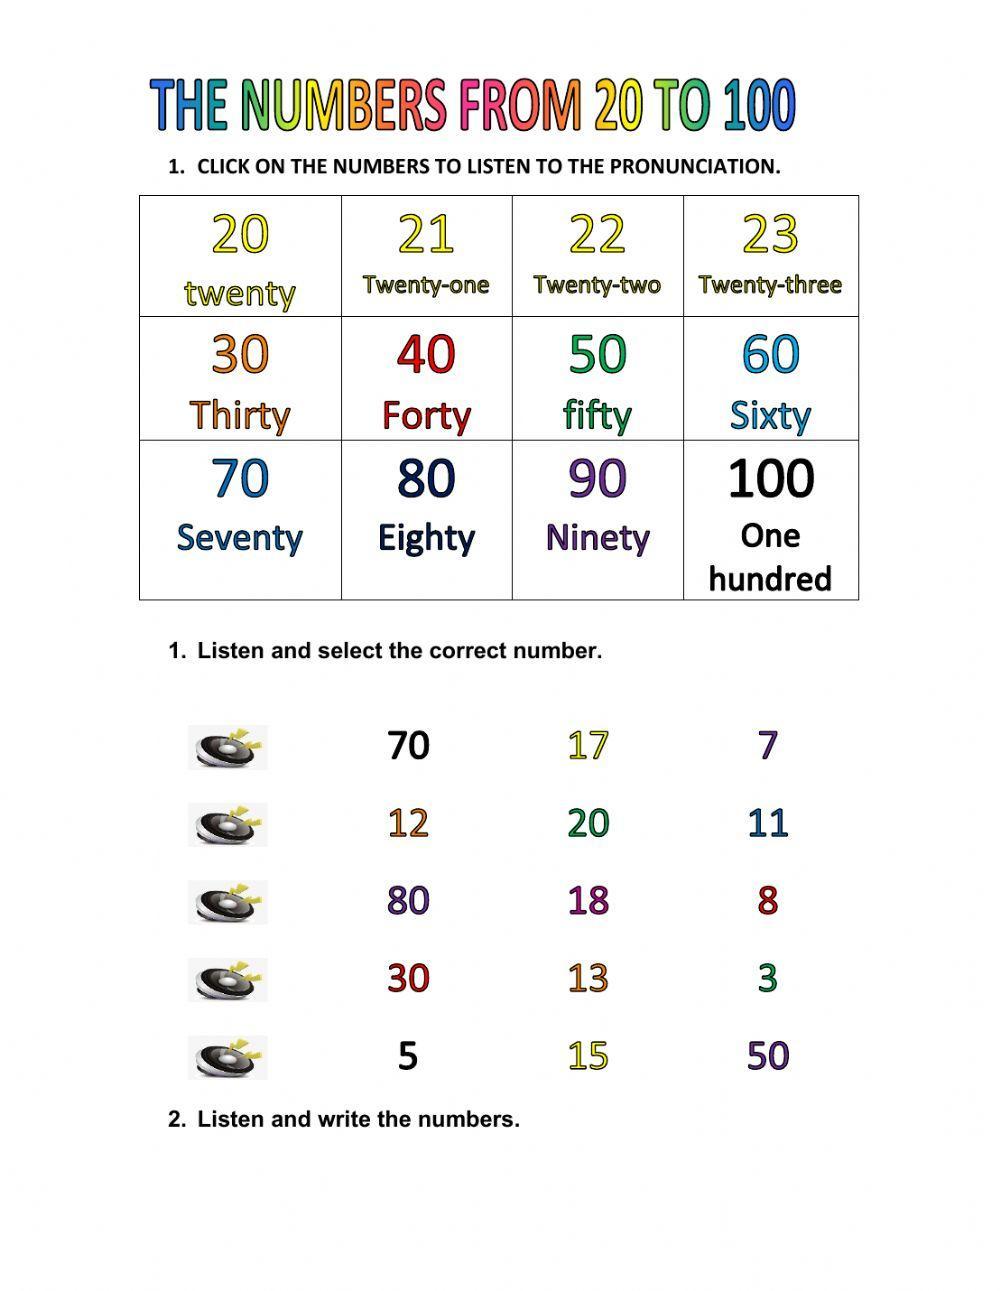 Numbers from 20 to 100 exercise